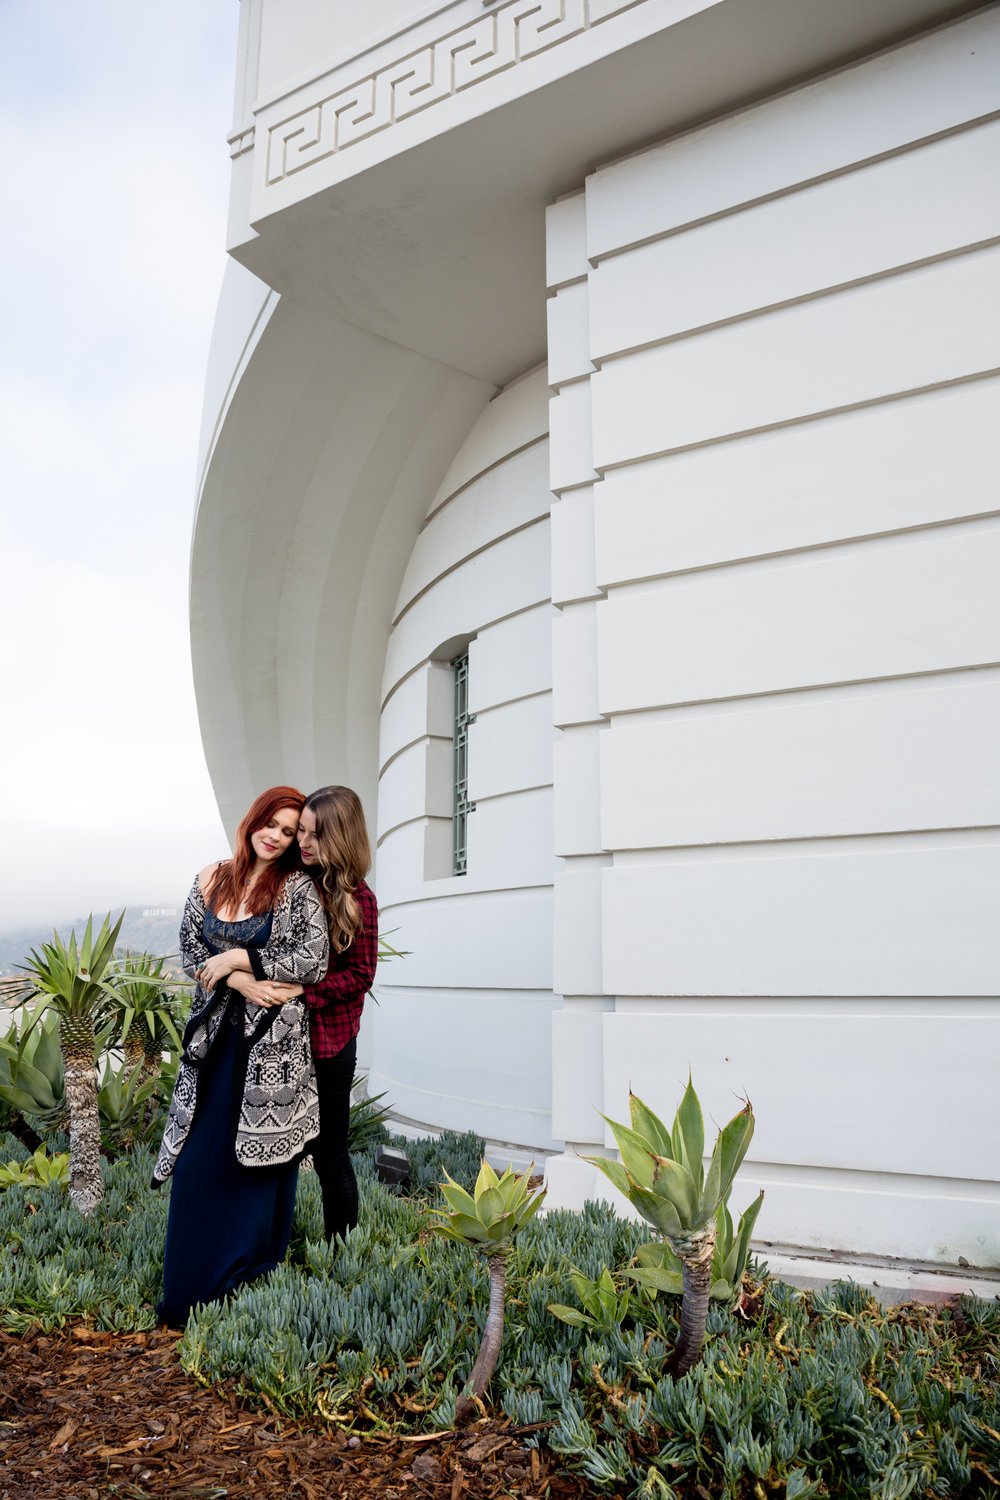 Courtney &amp; Tierney embracing at the griffith observatory in the background